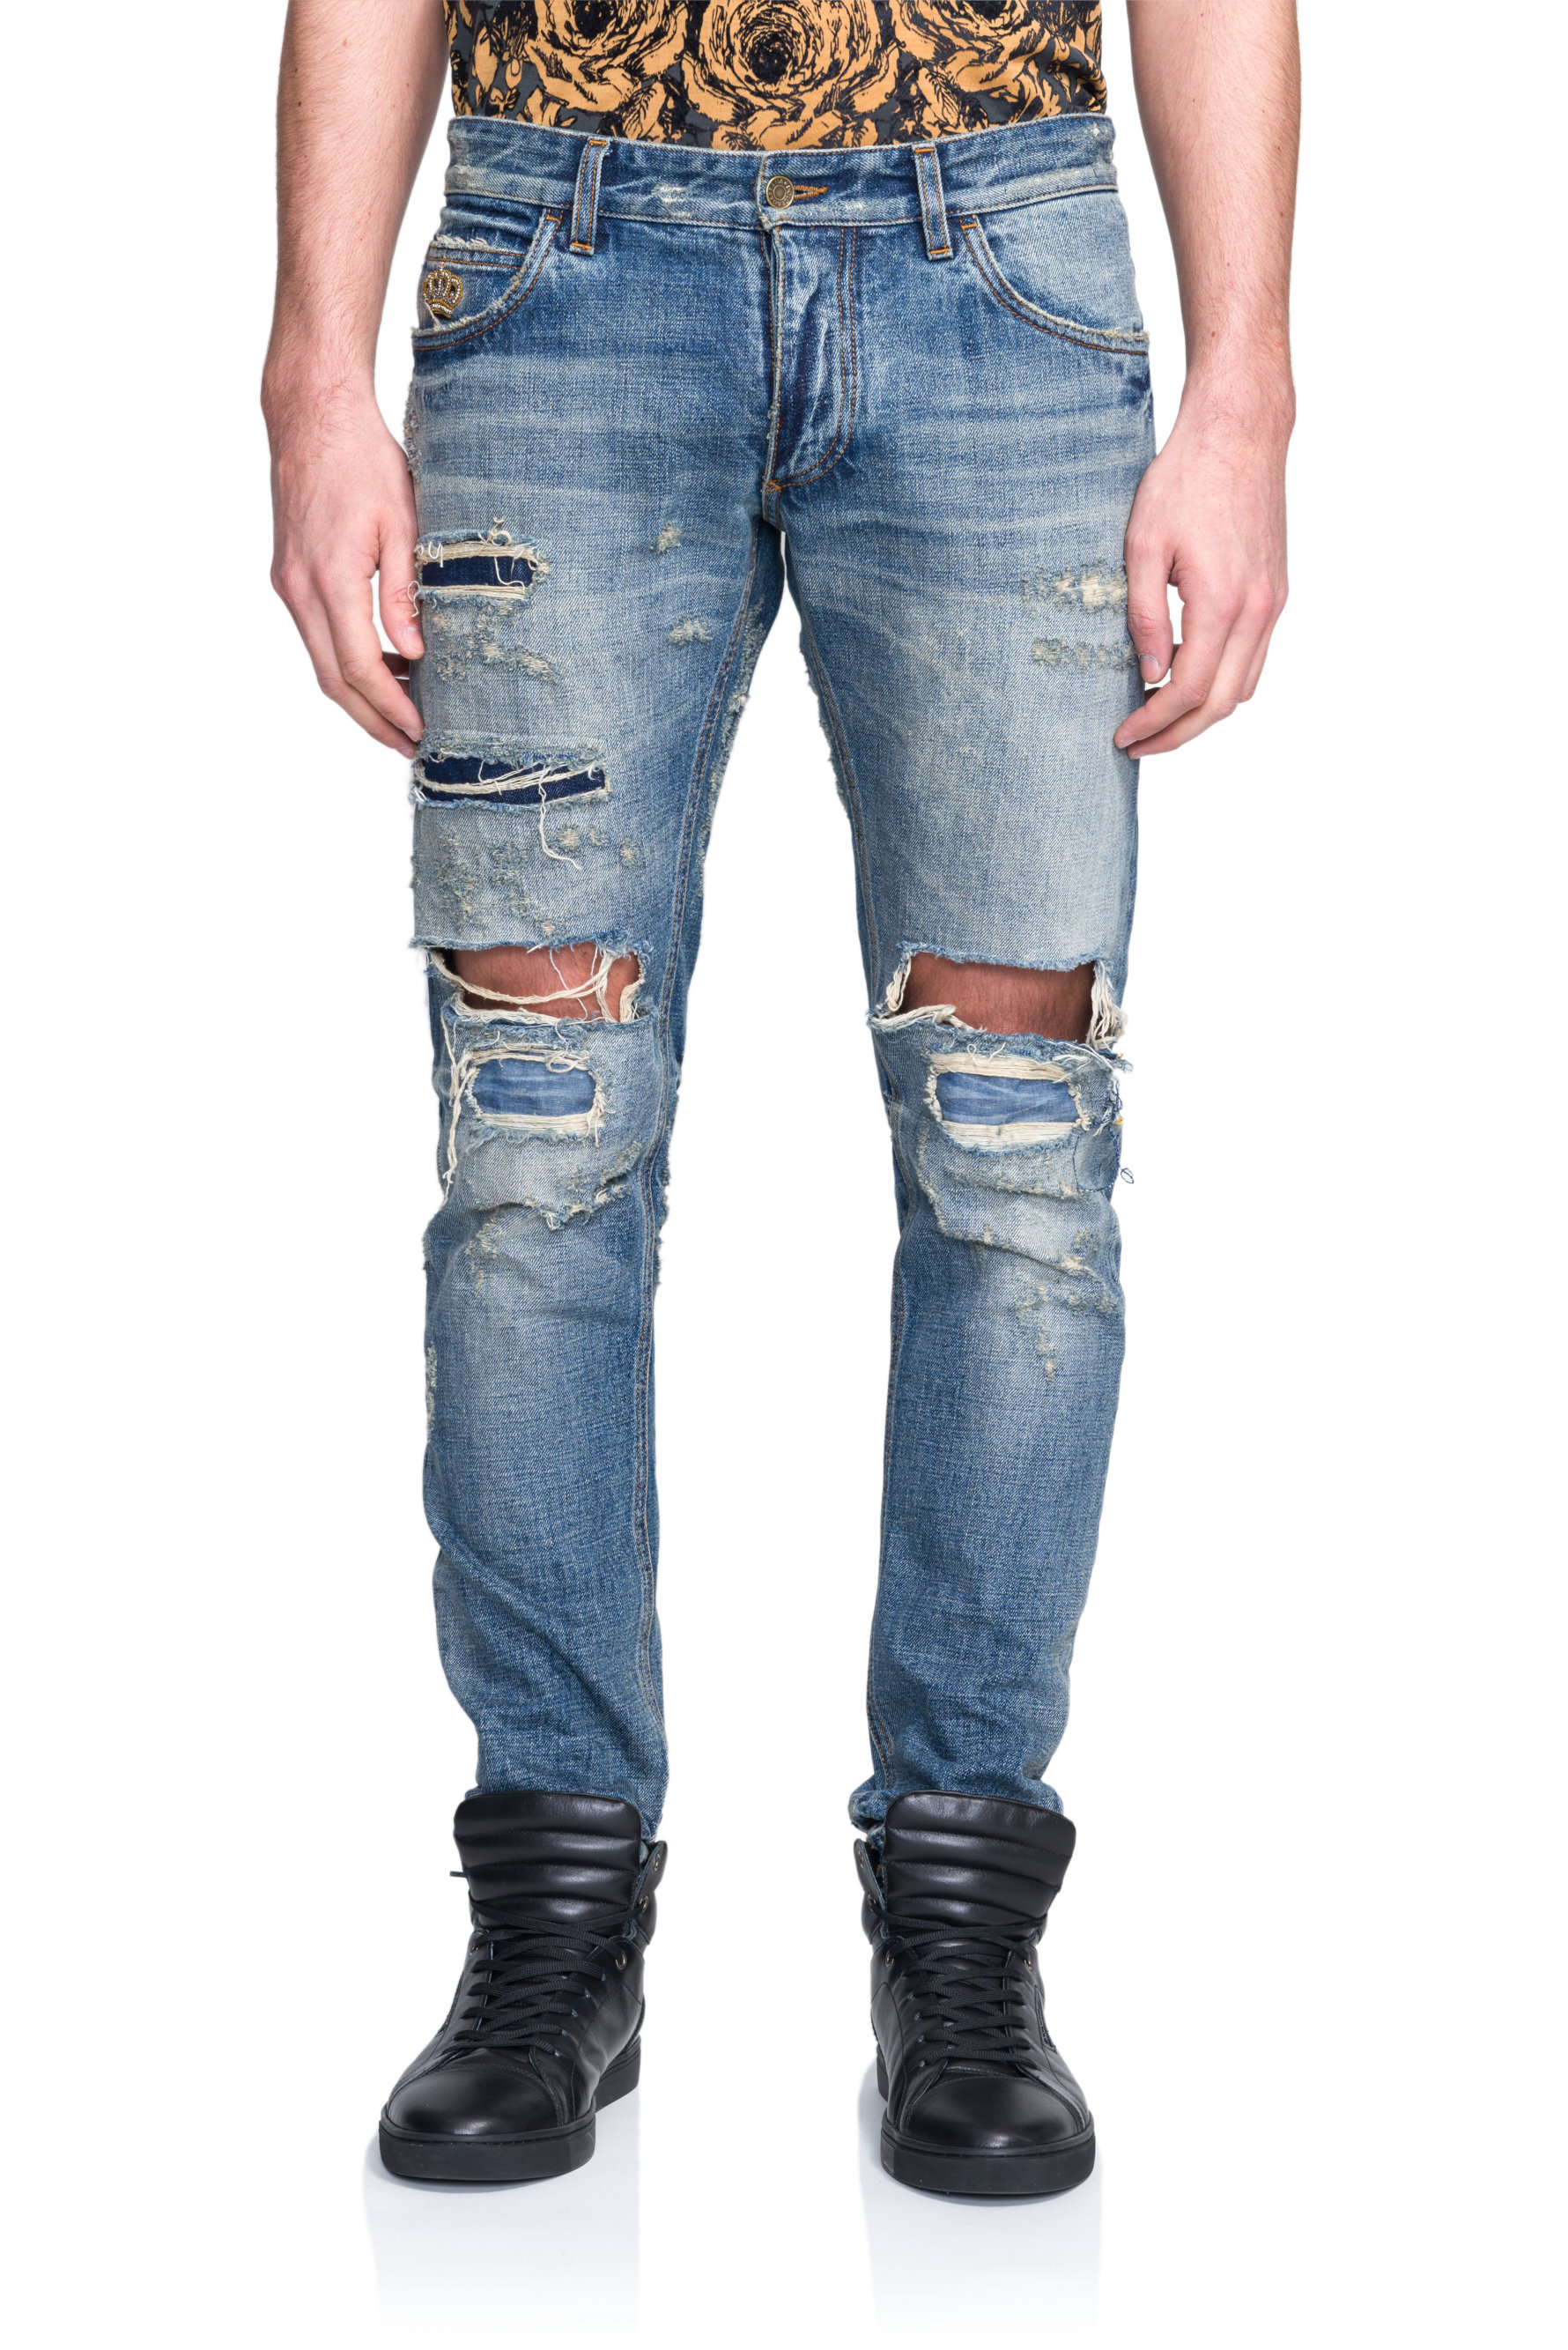 Lyst - Dolce & Gabbana Distressed Crown Patch Denim Jeans in Blue for Men